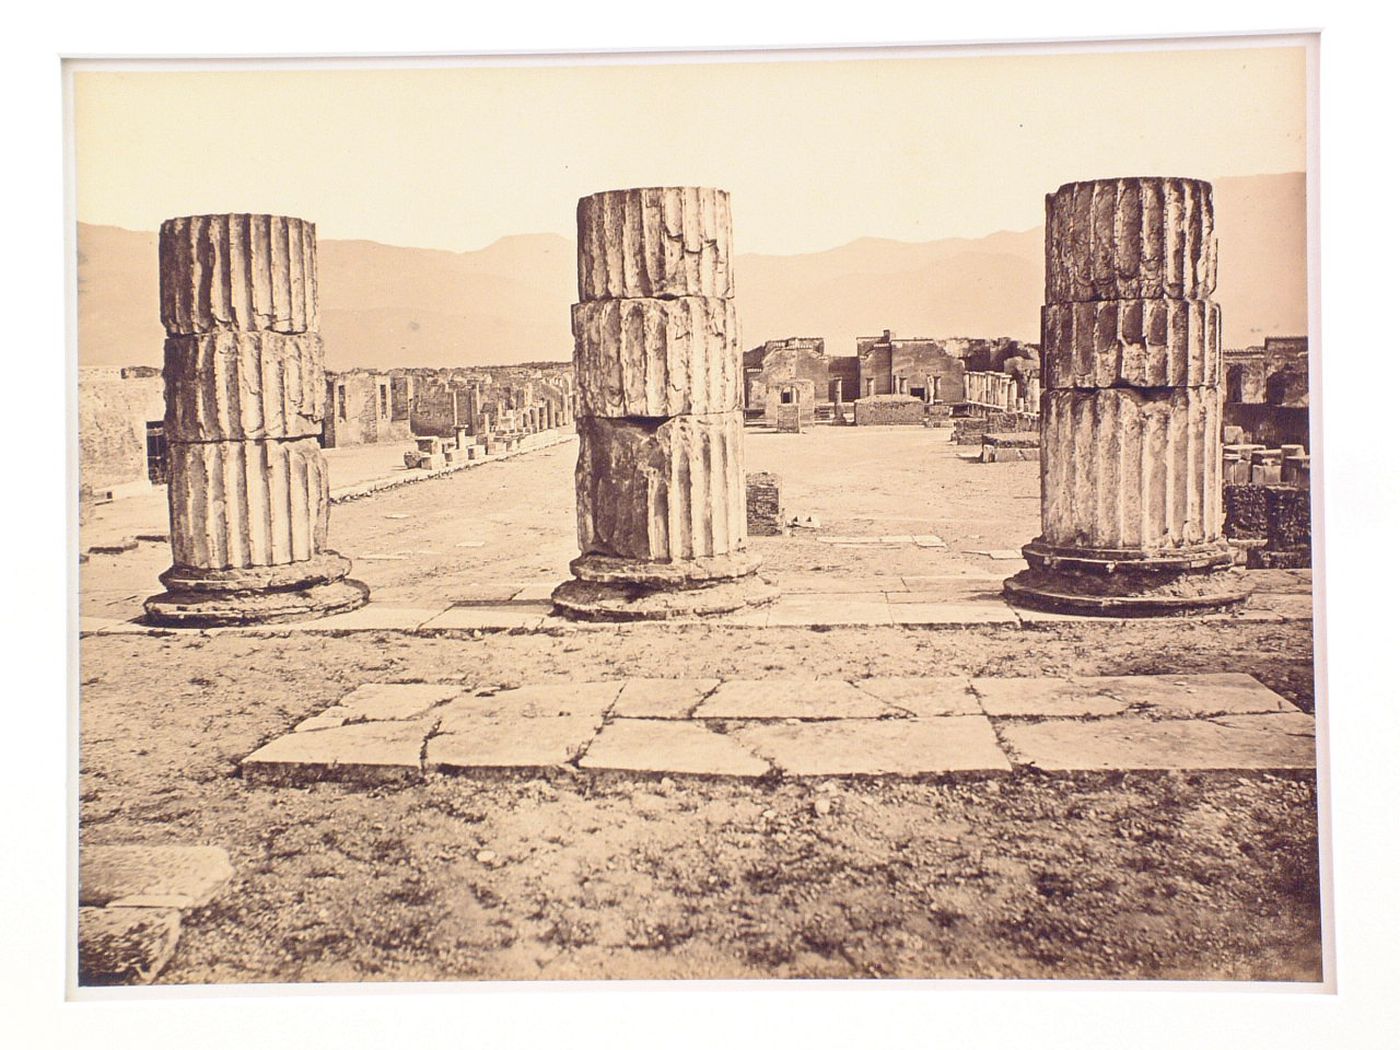 View of ruins of Pompeii, Italy